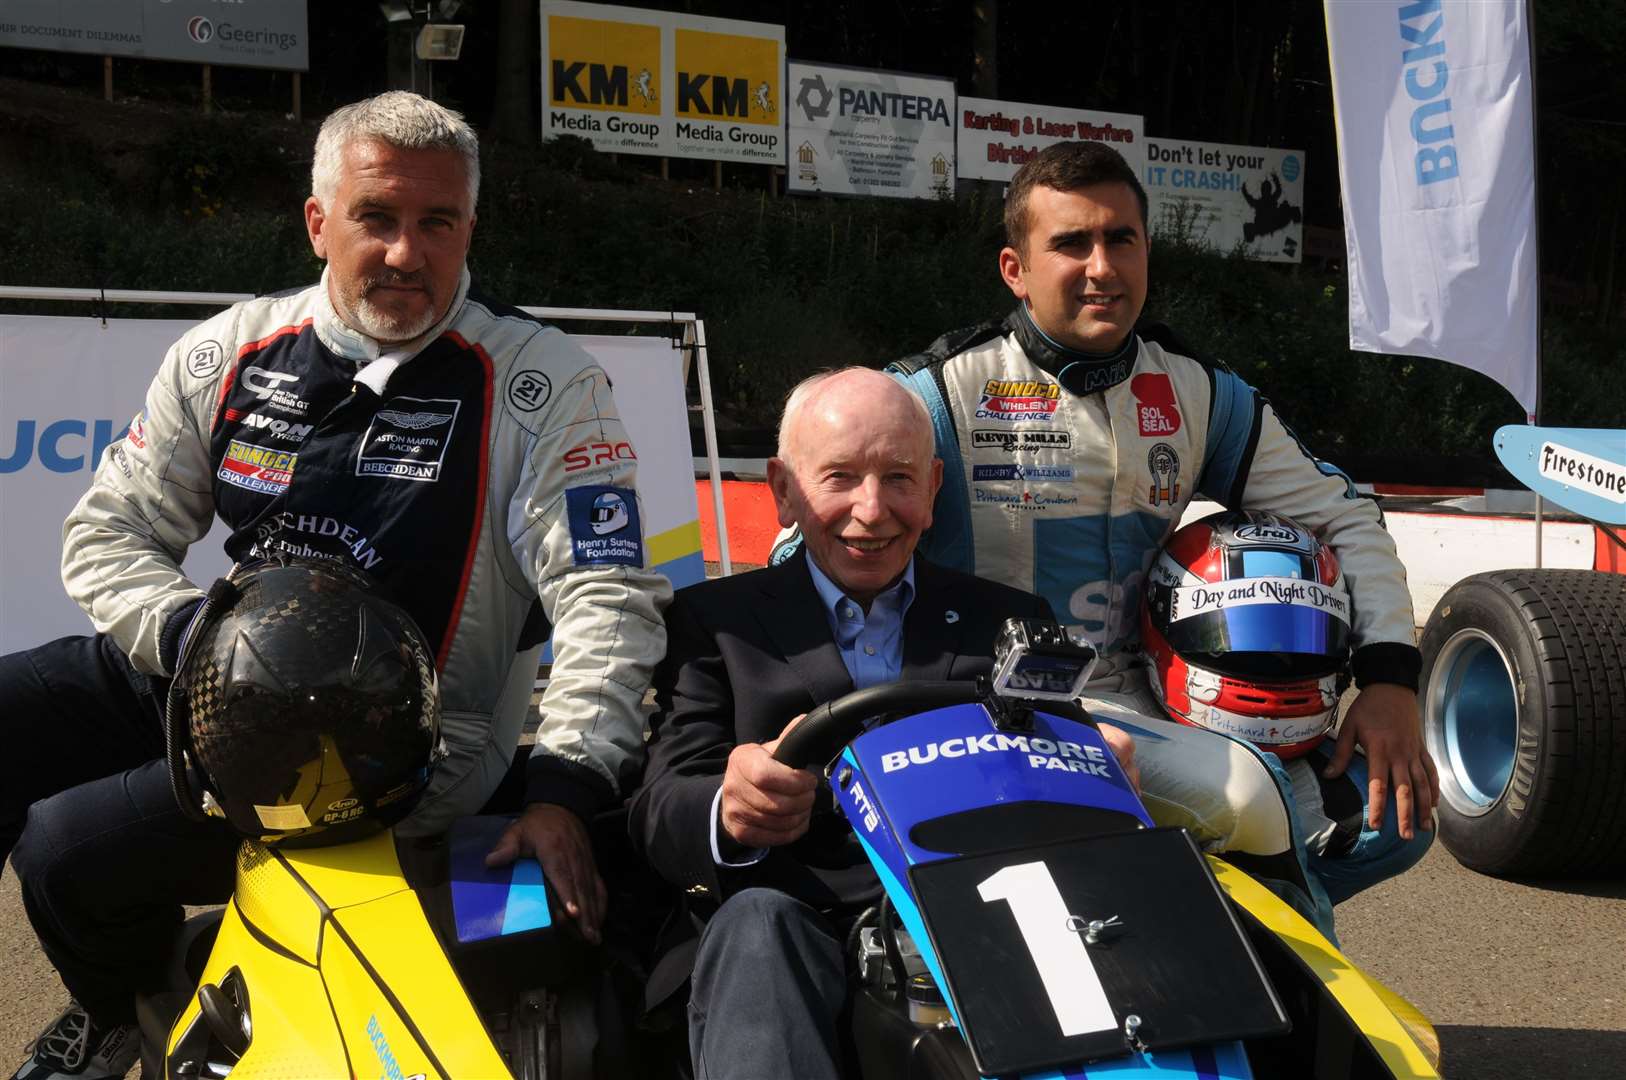 Buckmore Park Kart Circuit, Maidstone Road, Chatham.John Surtees OBE officially opening the new Buckmore Park Karting Ltd.Paul Hollywood, John Surtees and Scott Malvern.Picture: Steve Crispe FM3922026 (44912014)